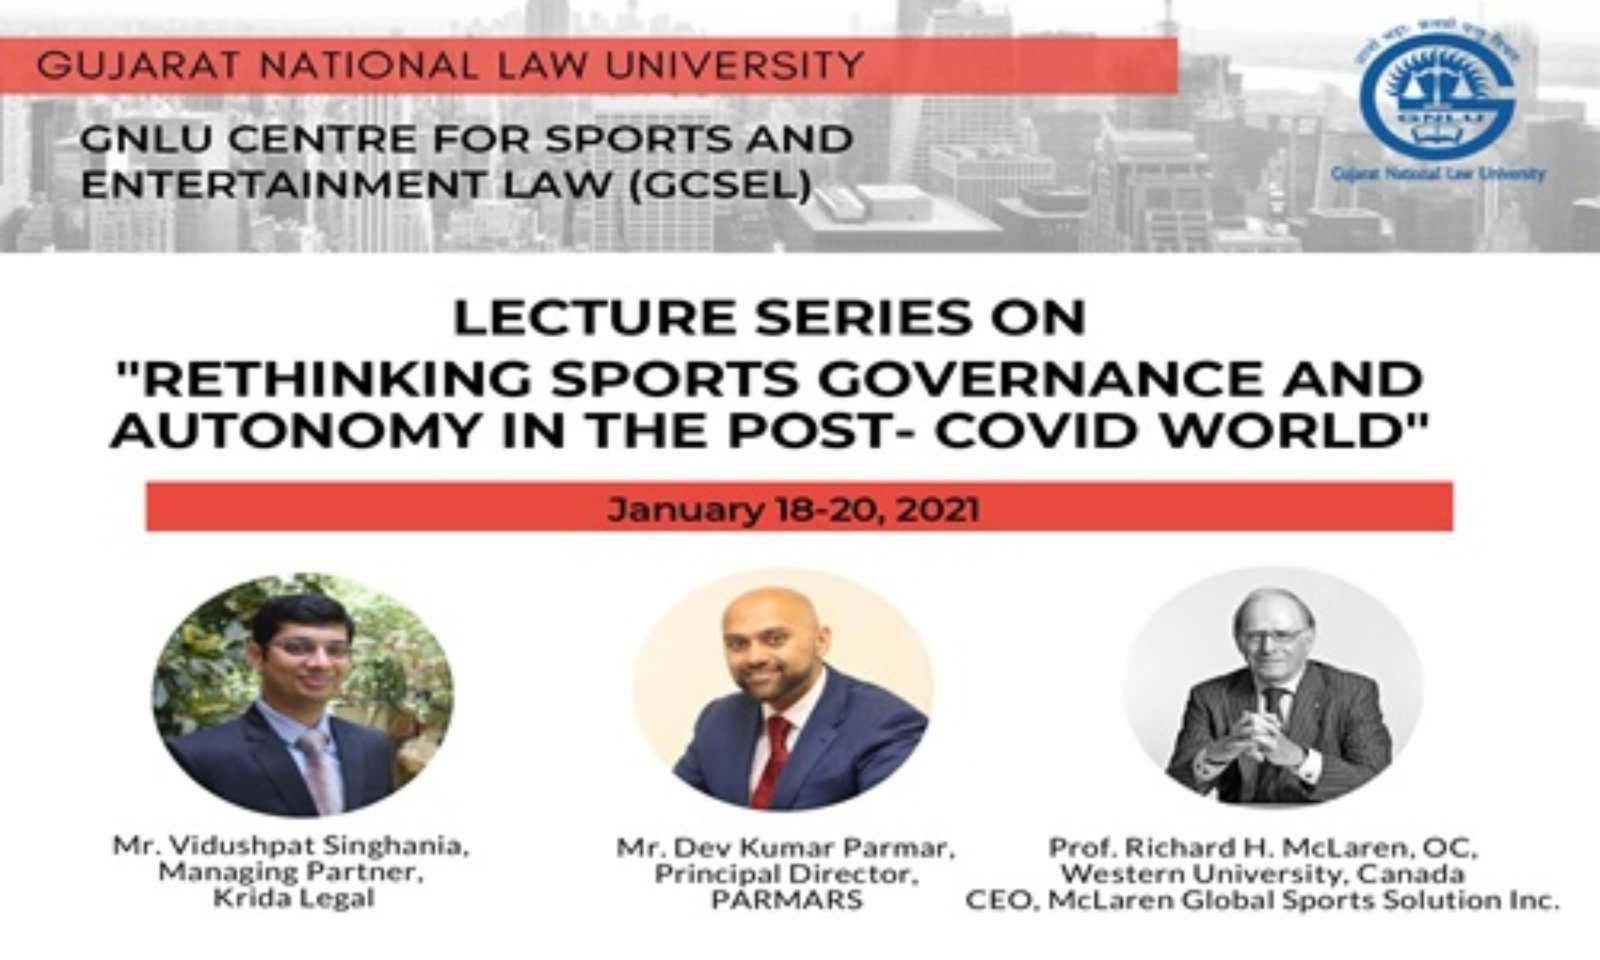 GCSEL Lecture Series on “Rethinking Sports Governance and Autonomy in the Post-Covid World” (18-20 January, 2021)